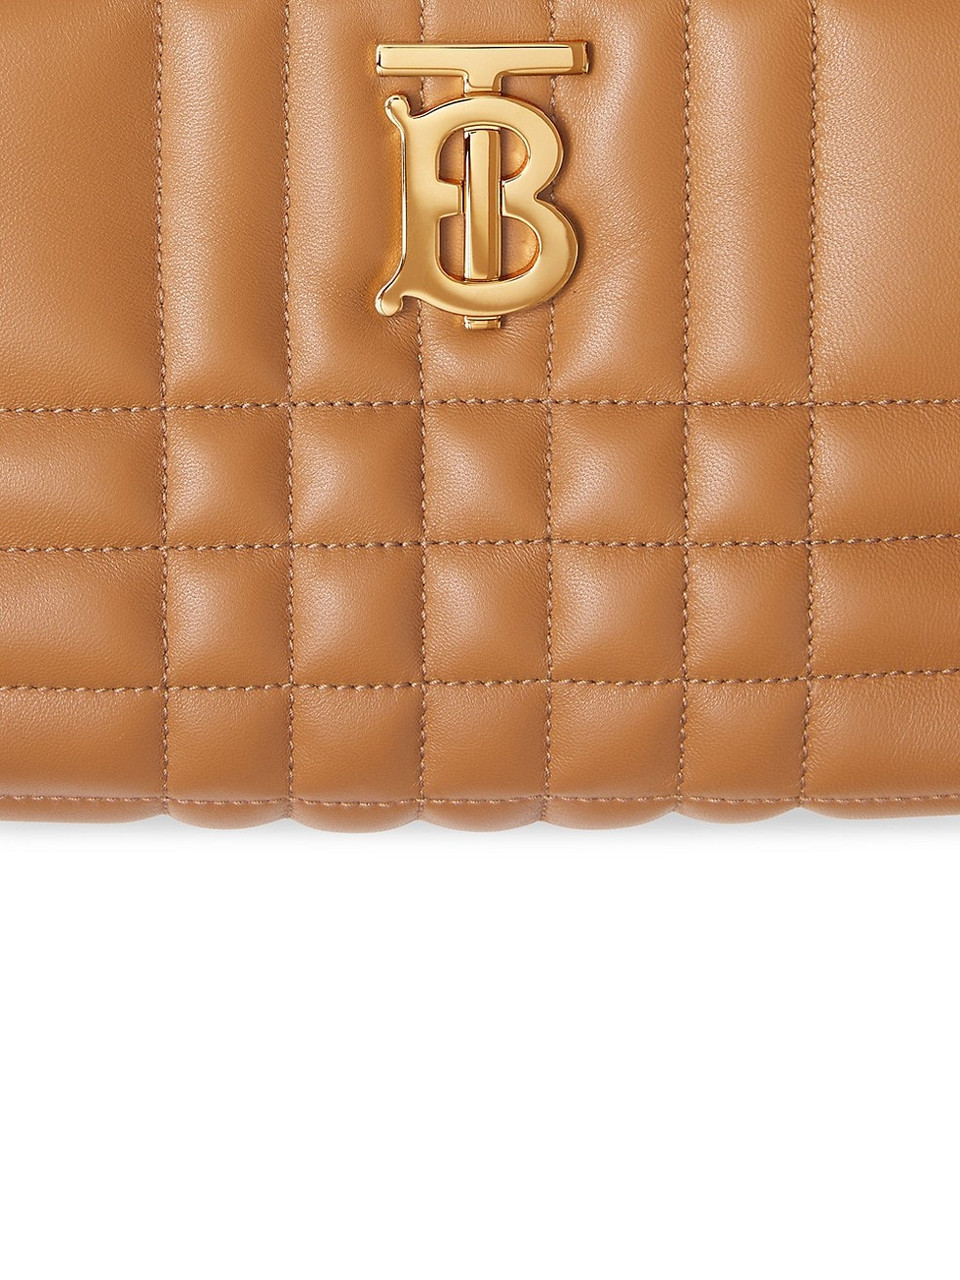 Burberry Small Lola Quilted Leather Bag